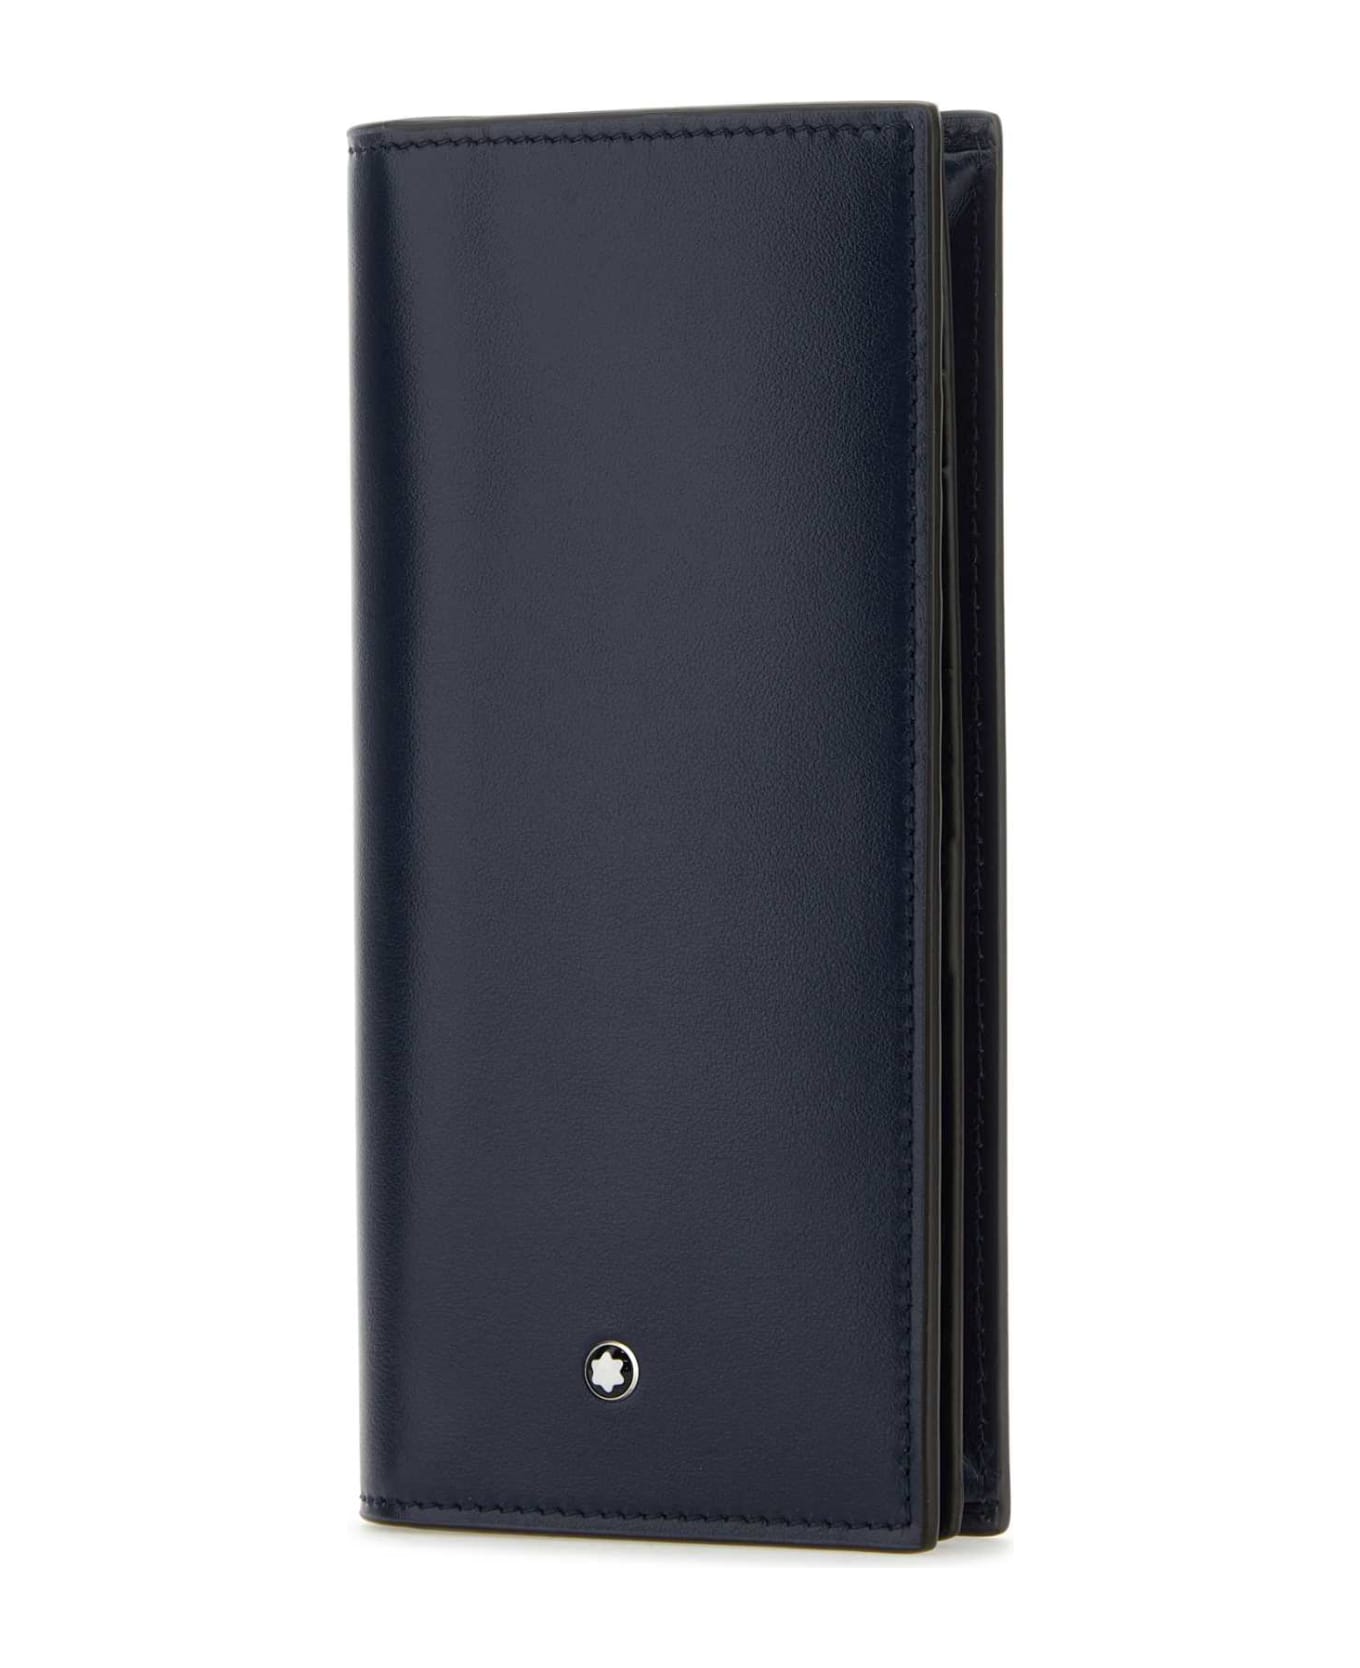 Montblanc Navy Blue Leather Wallet - INKBLUE